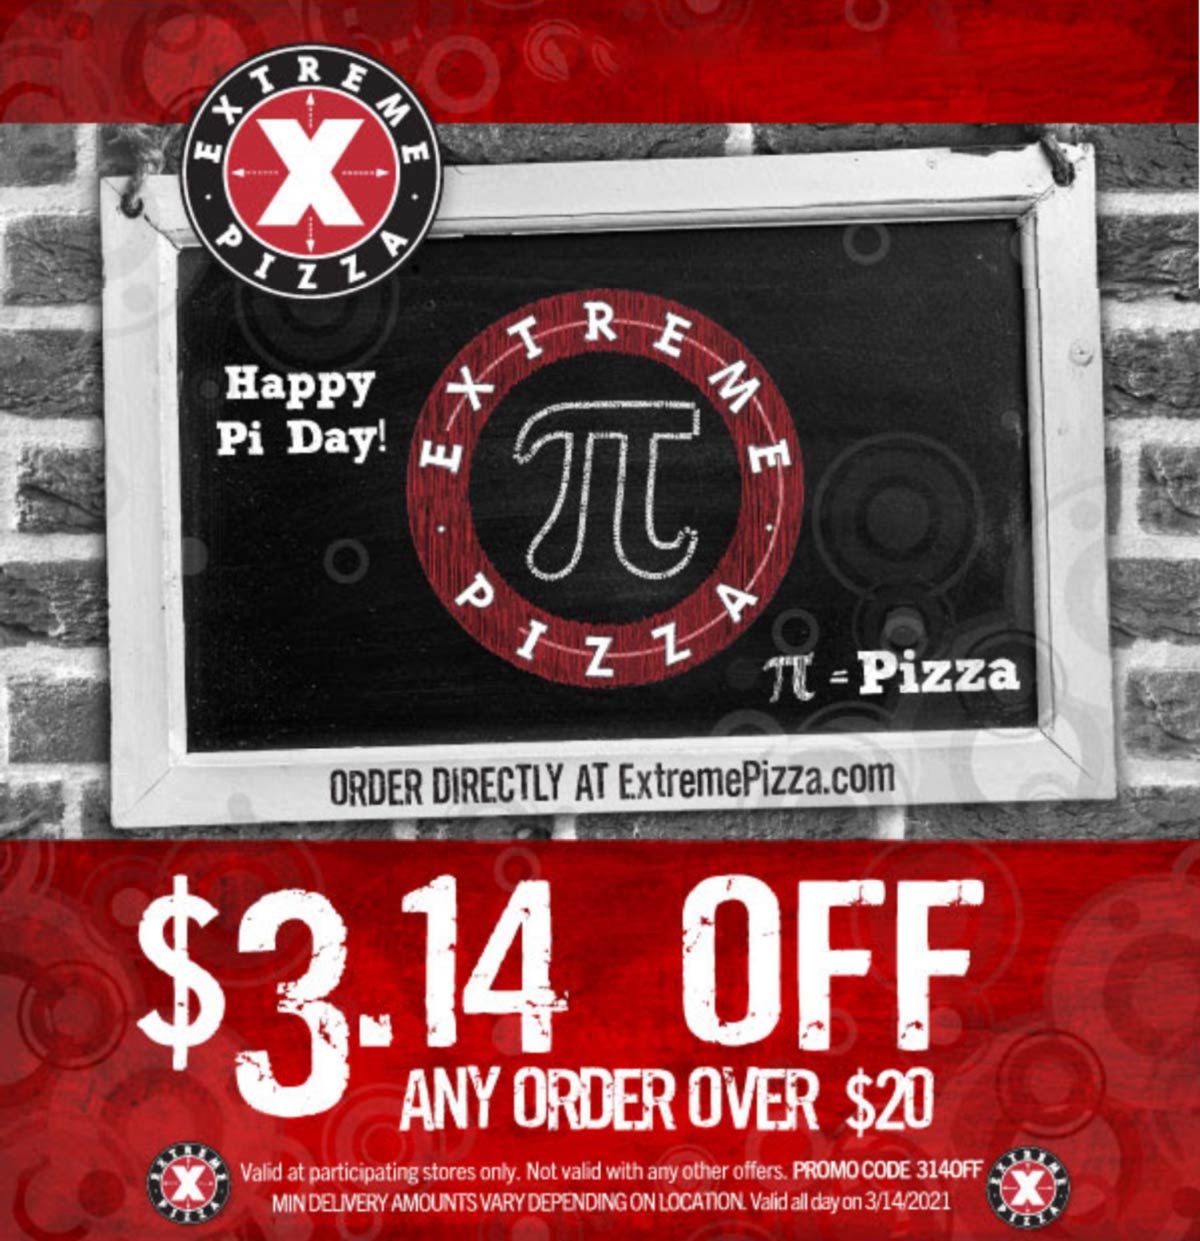 [May, 2021] 3.14 off 20 today at Extreme Pizza via promo code 314OFF